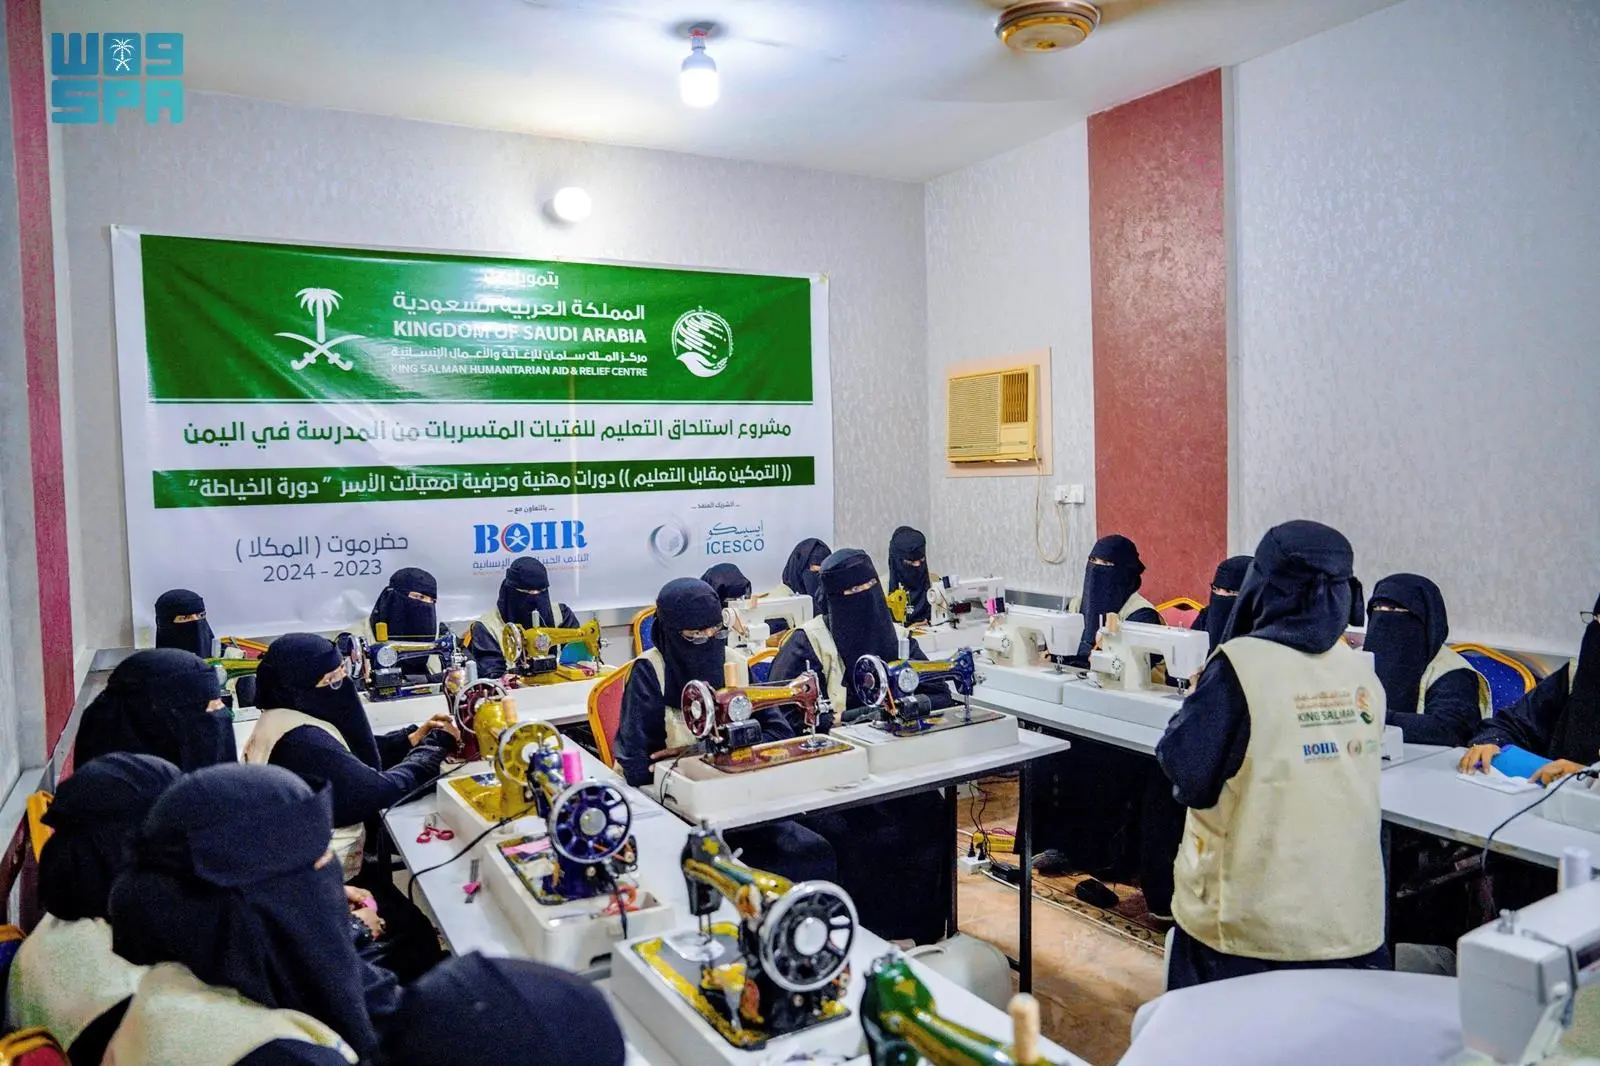 Initiation of Training and Empowerment Programs in Mukalla and Seiyun